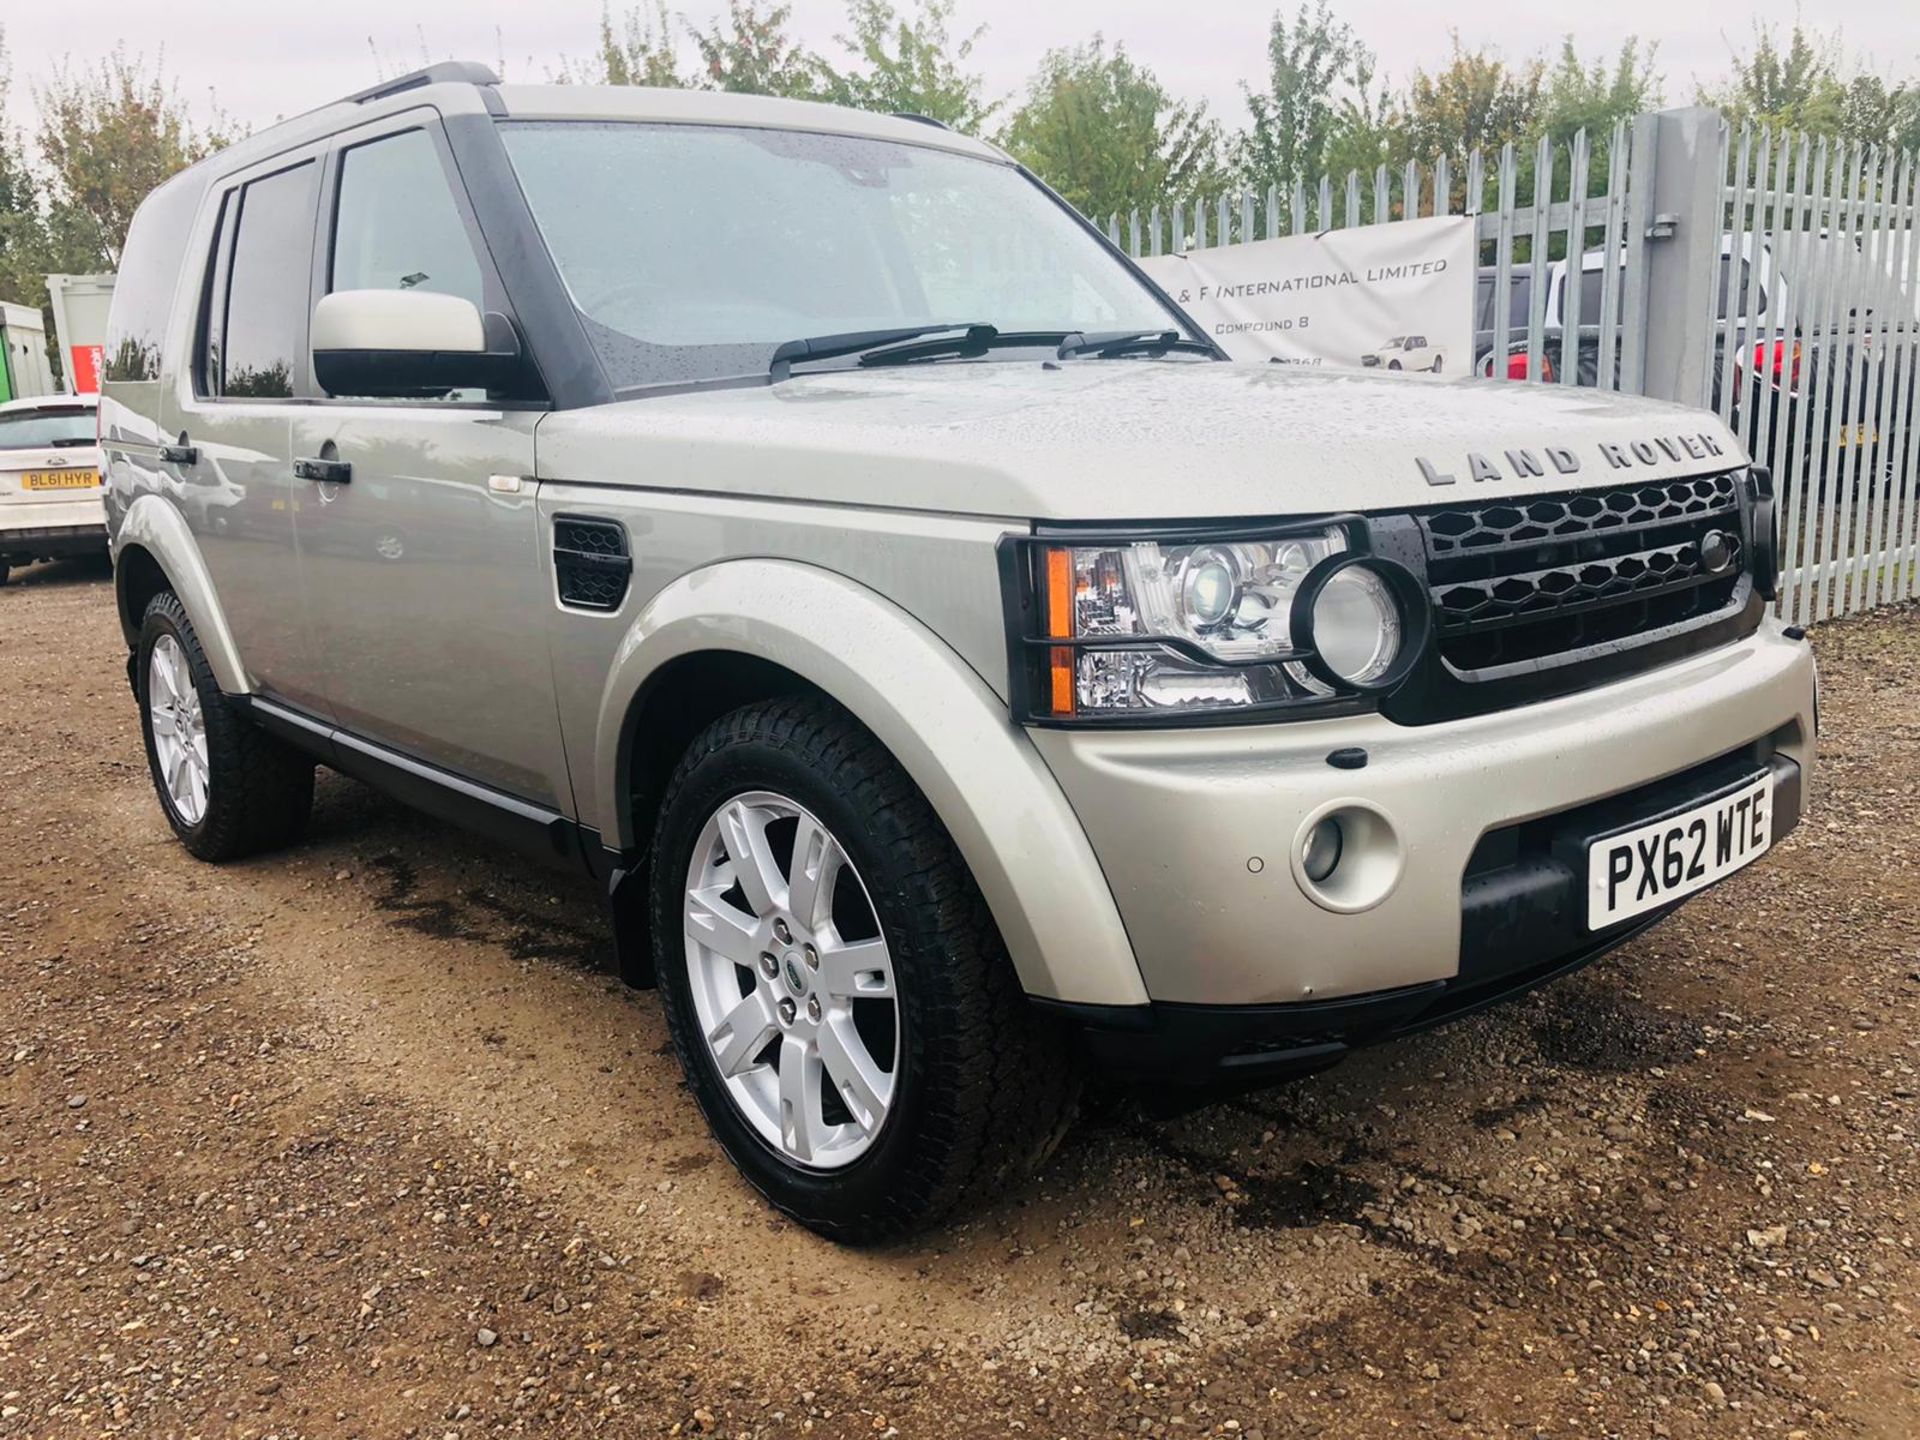 **ON SALE** Land Rover Discovery 4 3.0 SDV6 255 Command Shift Auto 2012 '62 Reg' Sat Nav - Air con - Image 2 of 33